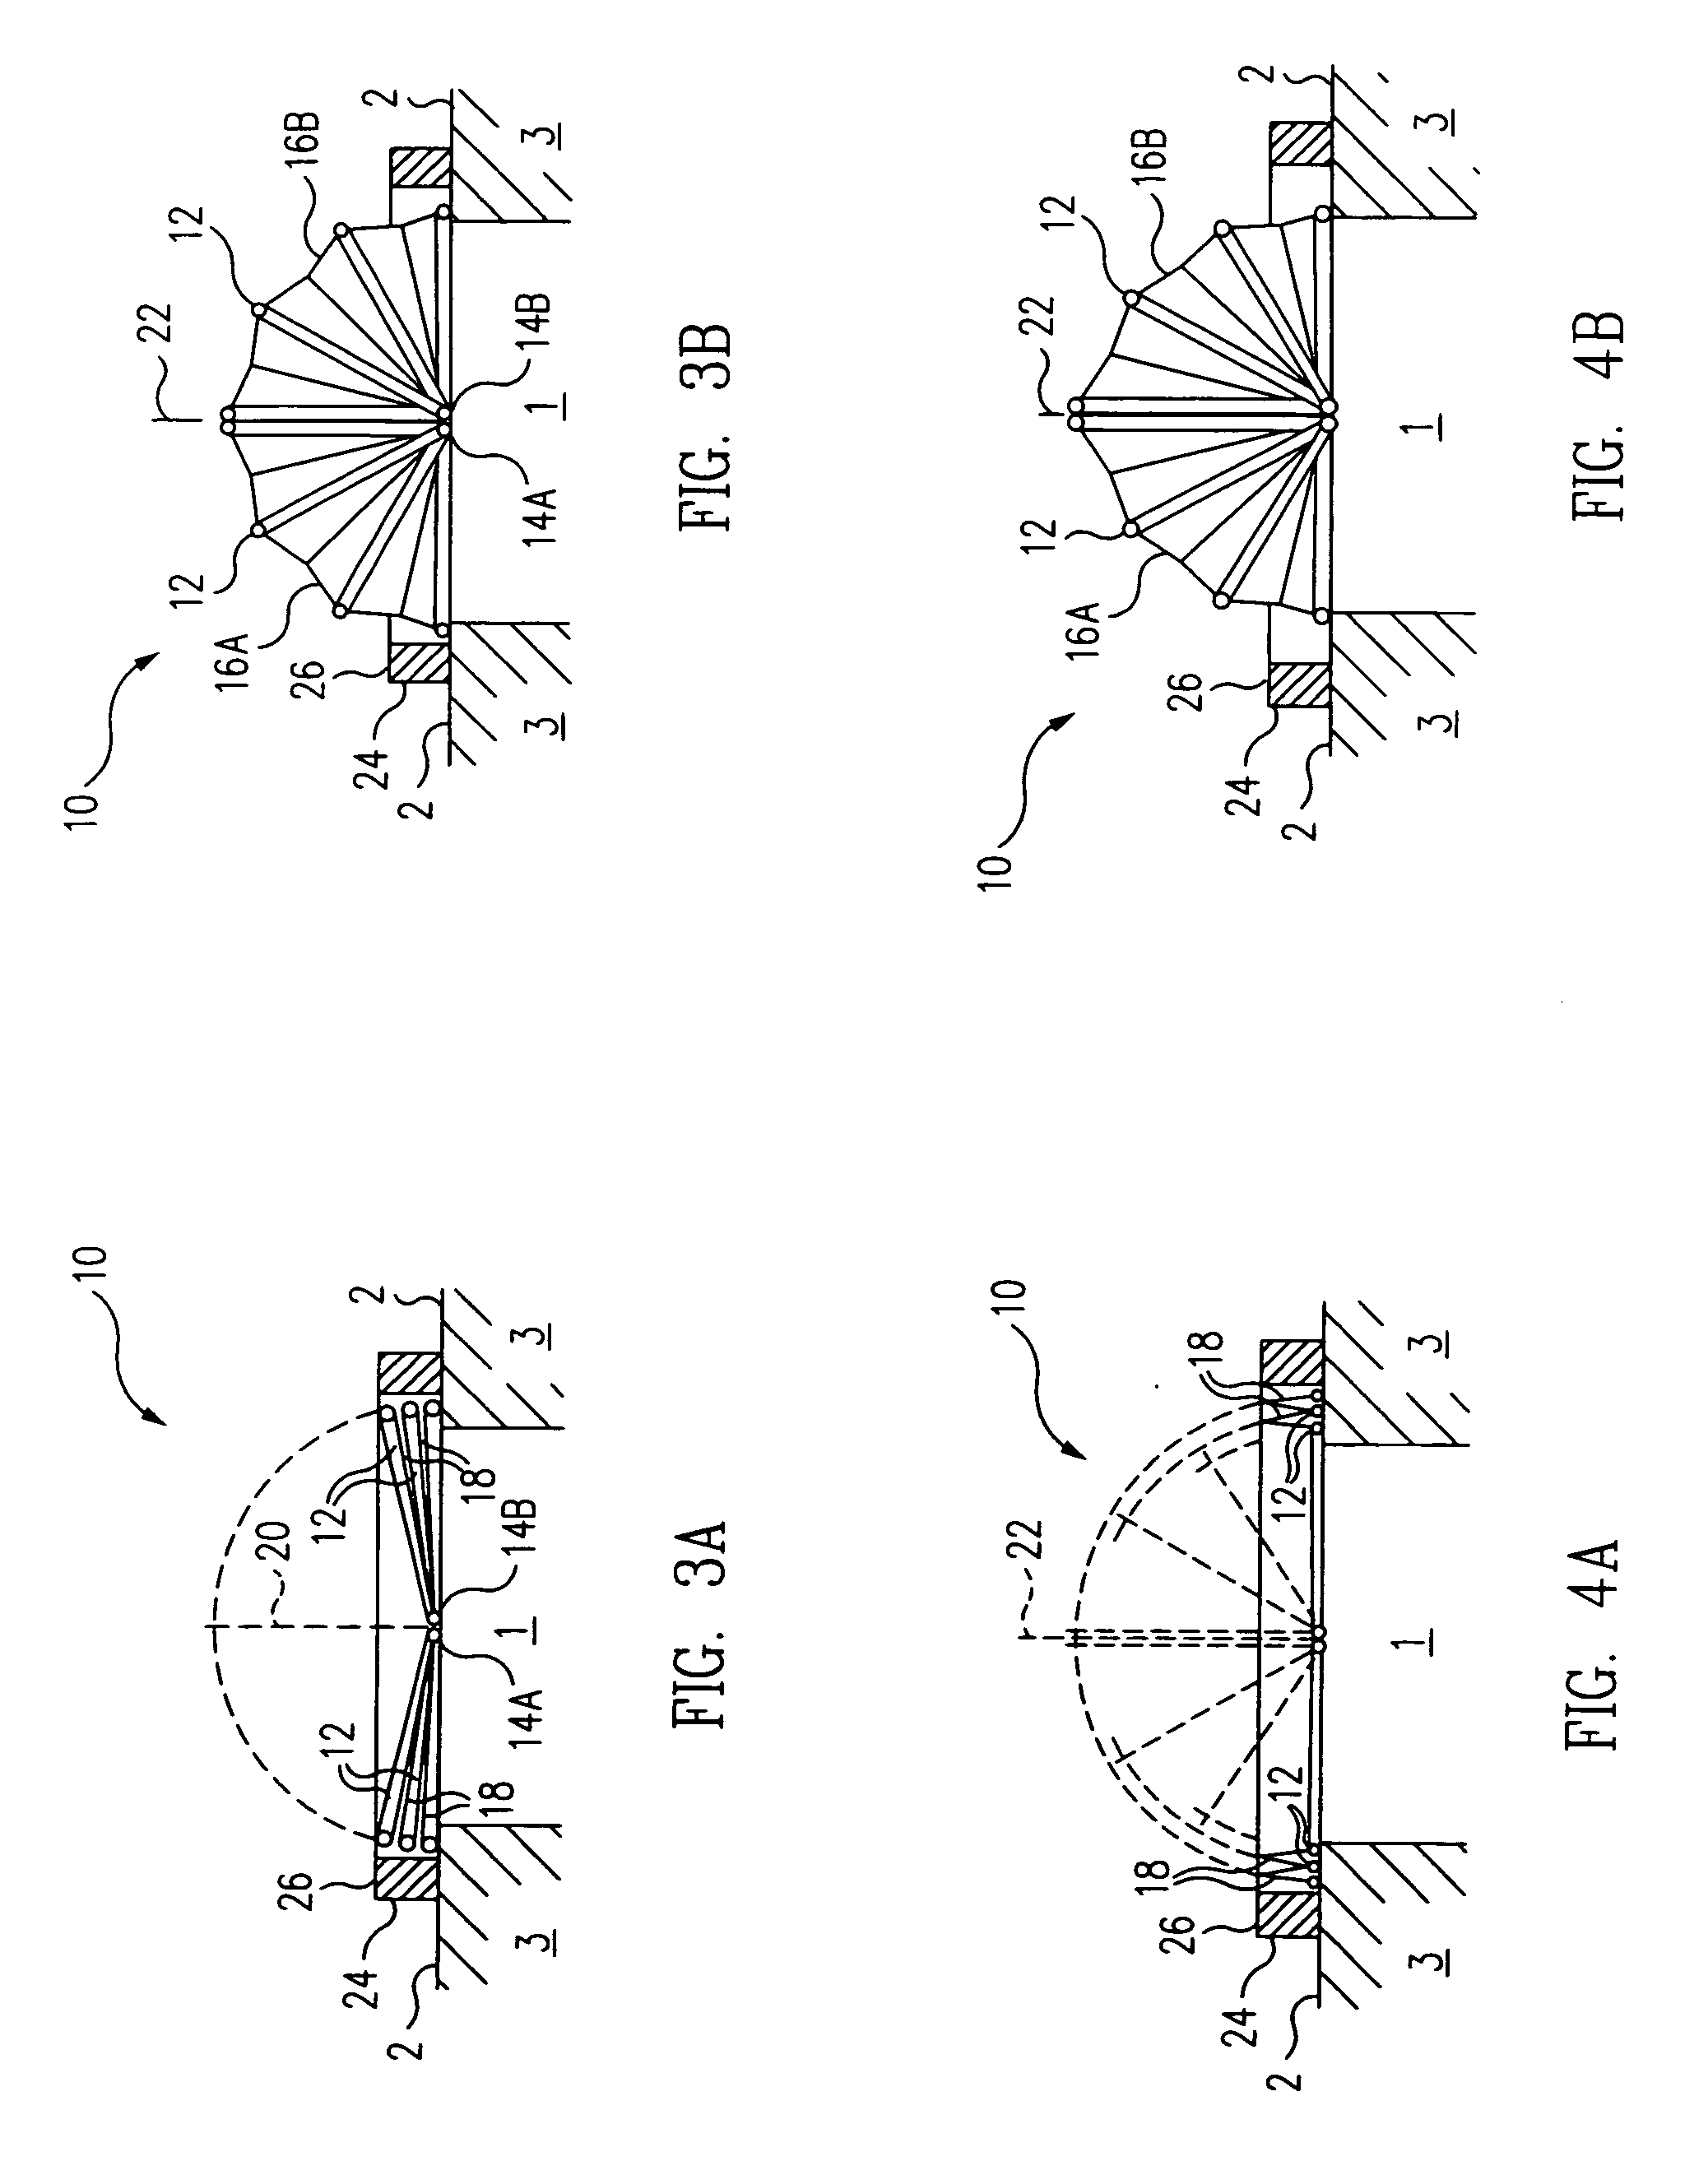 Folding retractable protective dome for space vehicle equipment